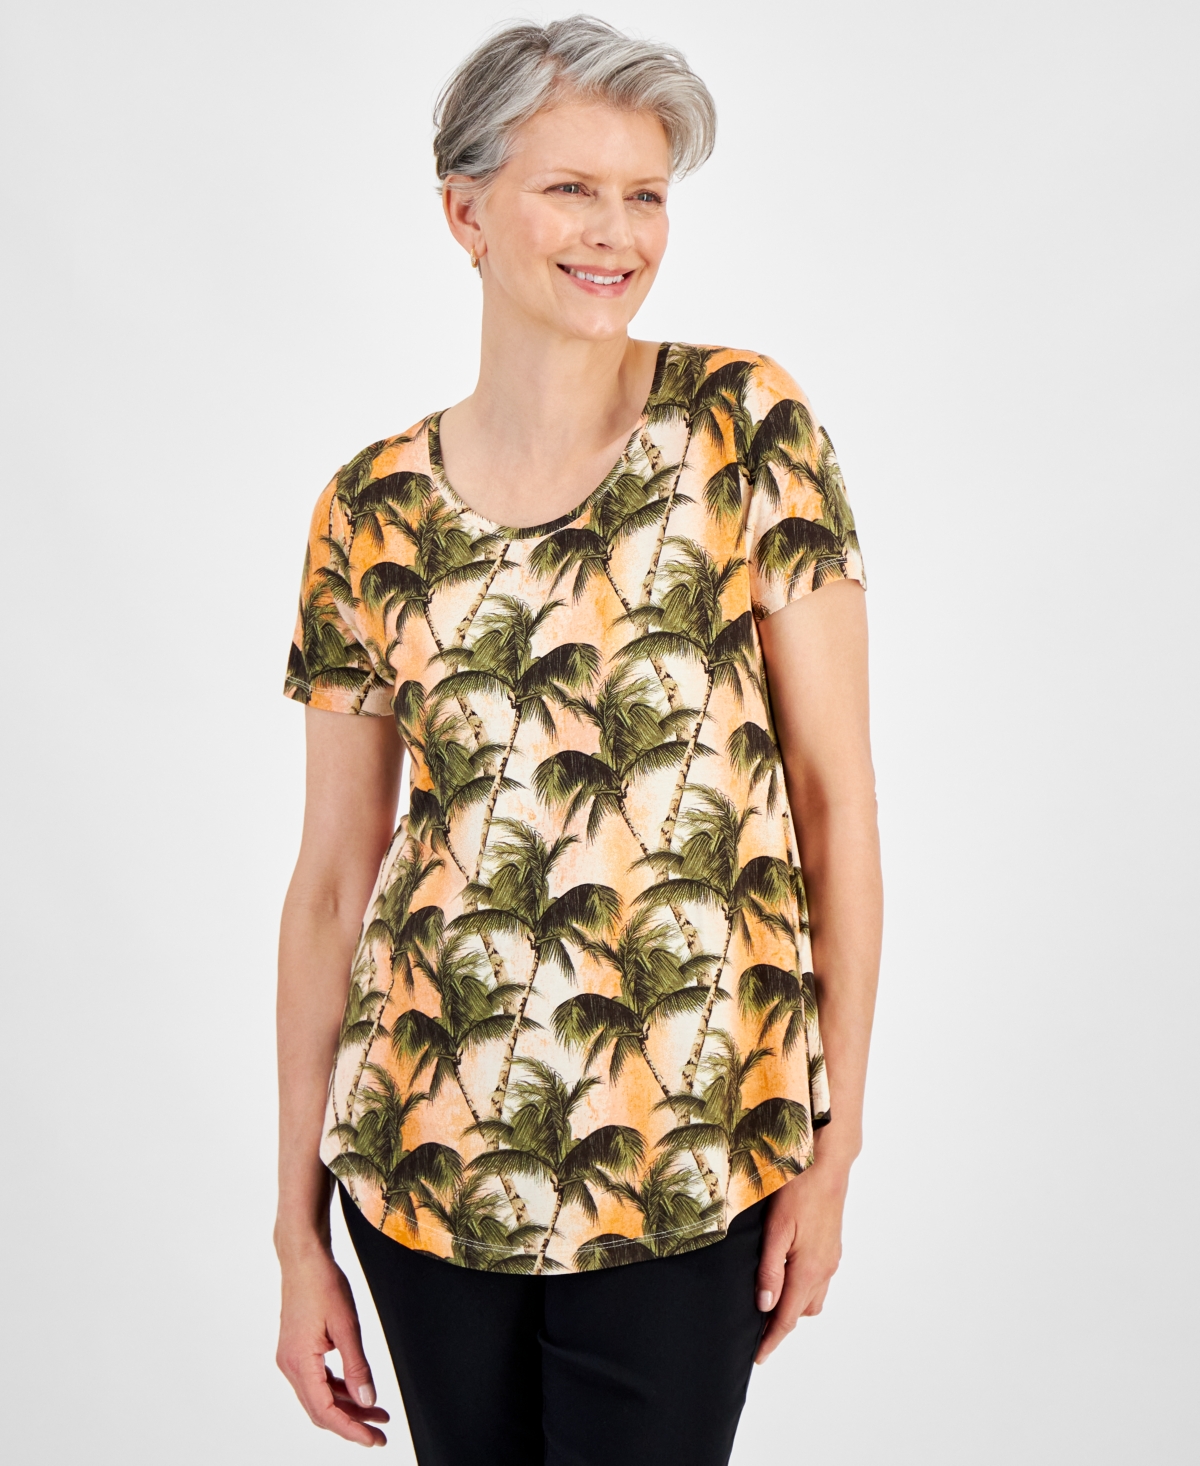 Jm Collection Women's Printed Scoop-Neck Short-Sleeve Top, Created for Macy's - Sante Fe Sun Combo